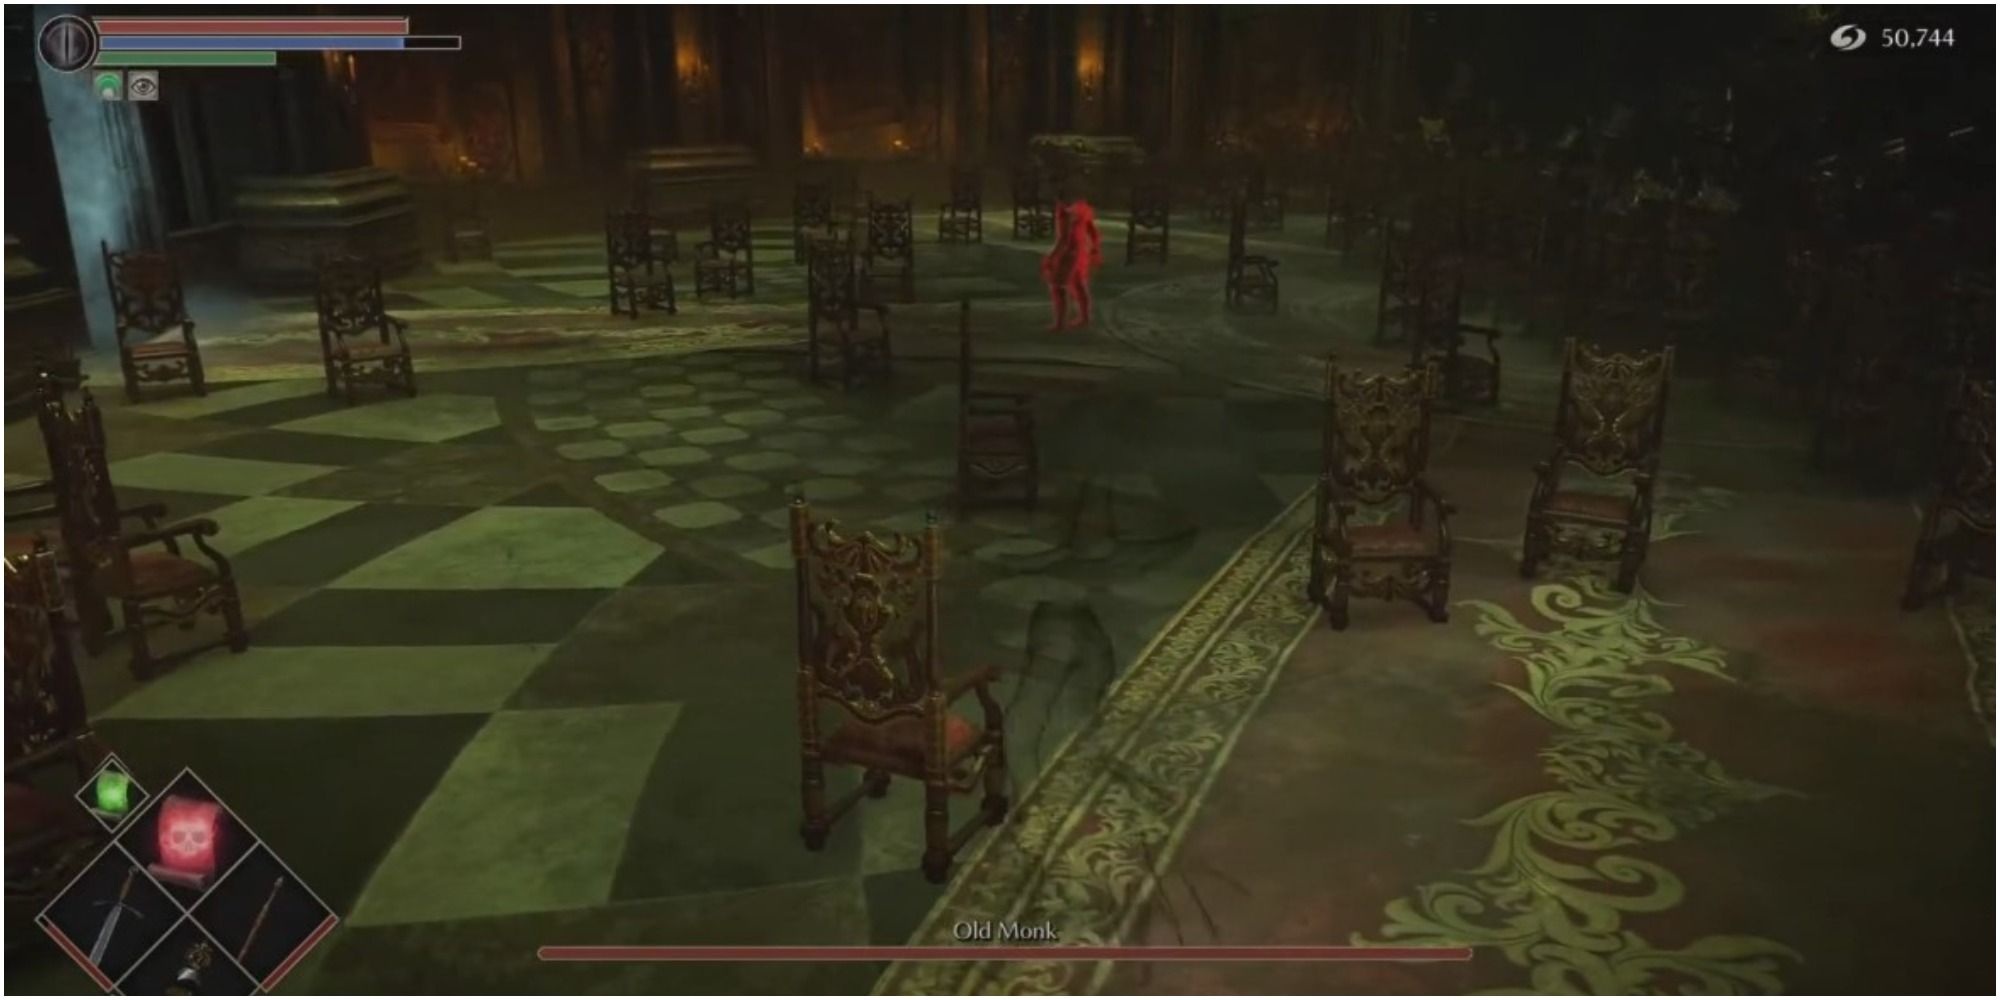 Demon's Souls Using Invisibility To Sneak Around The Old Monk